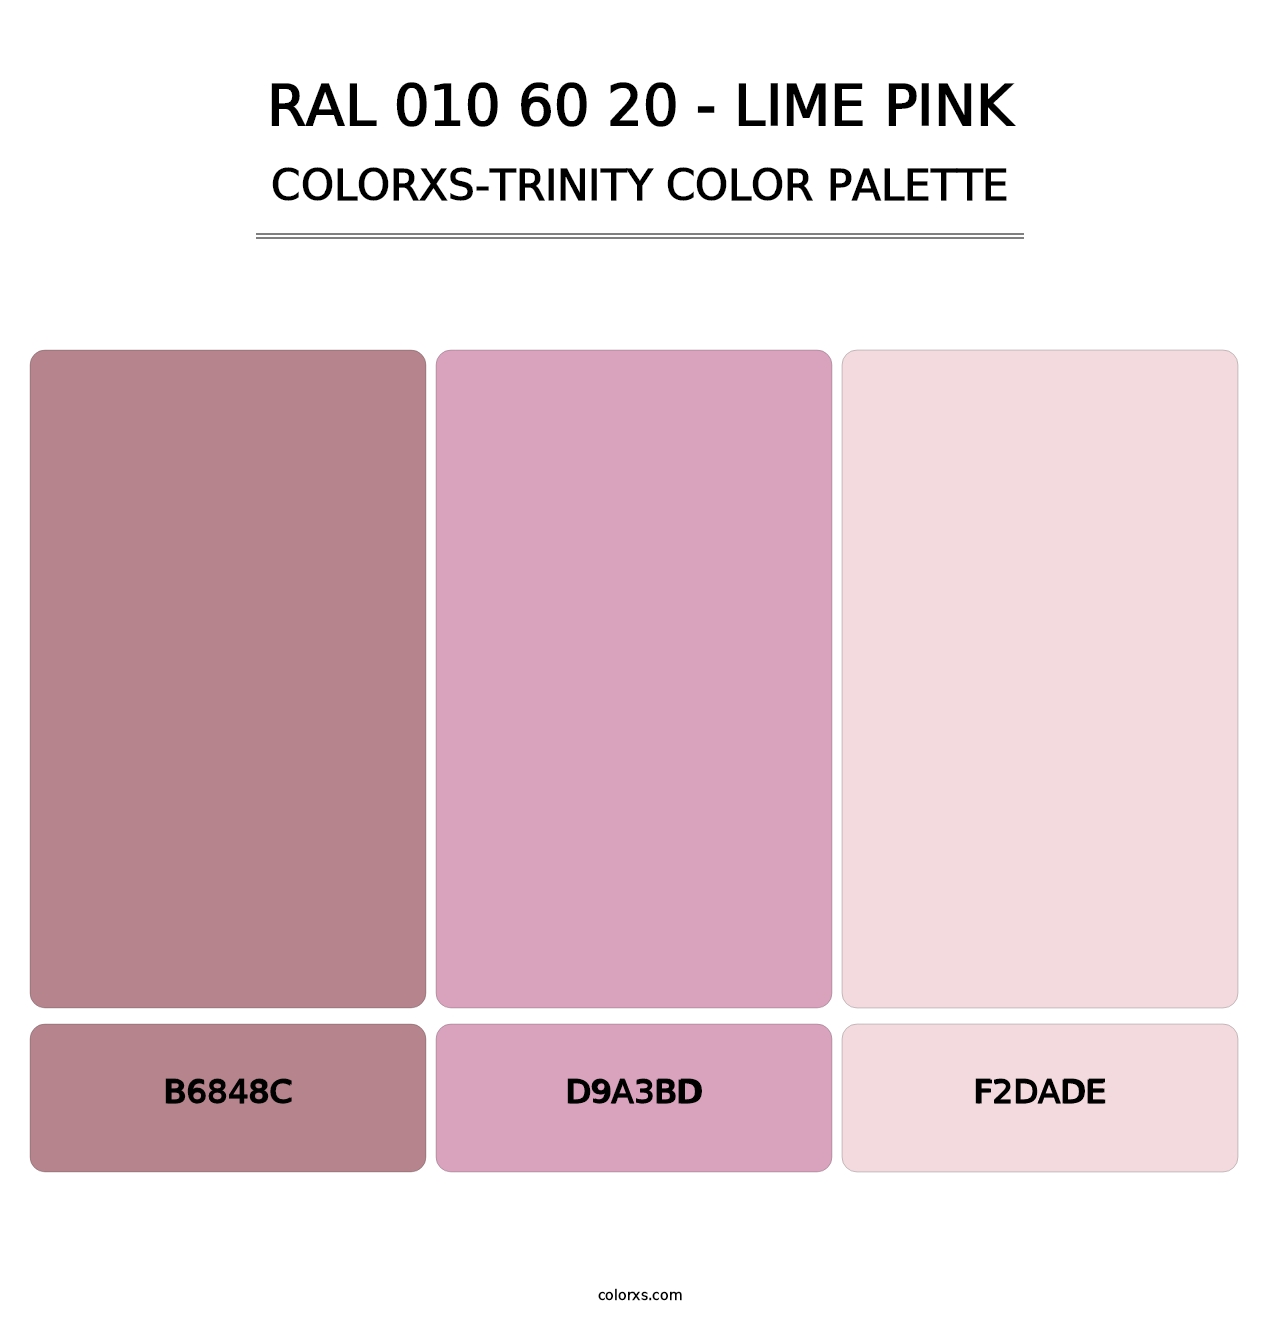 RAL 010 60 20 - Lime Pink - Colorxs Trinity Palette